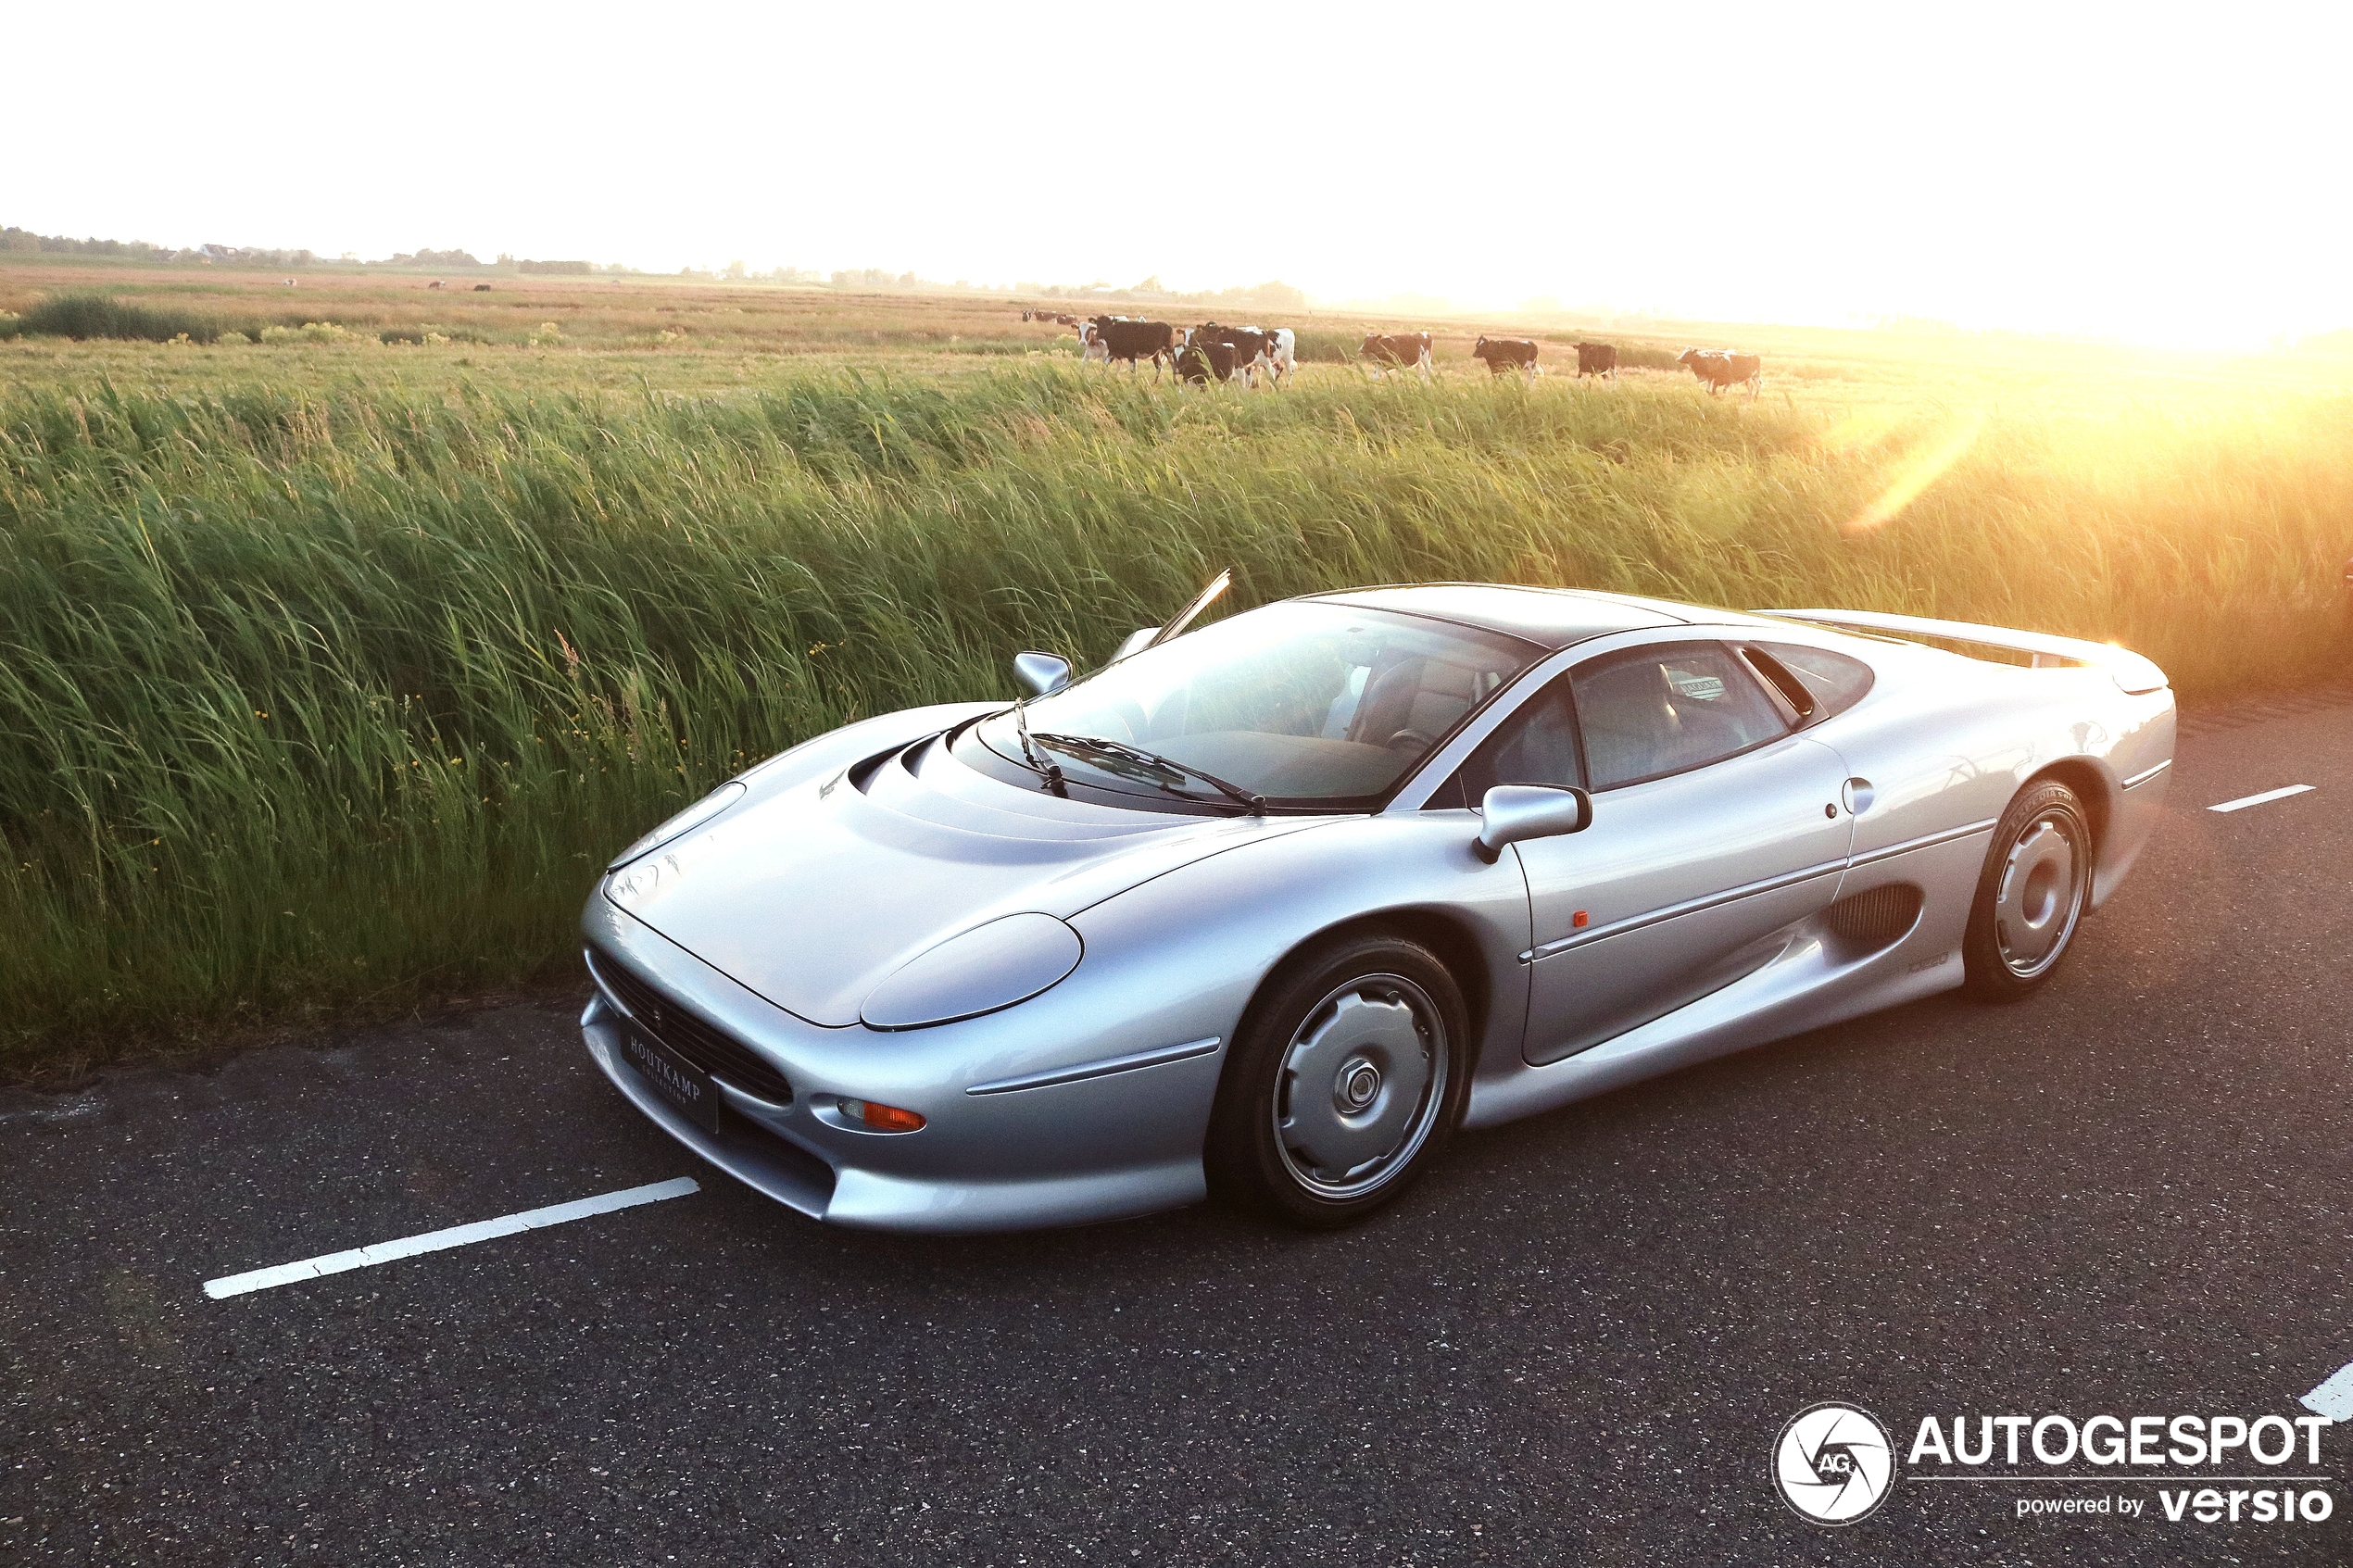 Stunning images of an XJ220 emerge